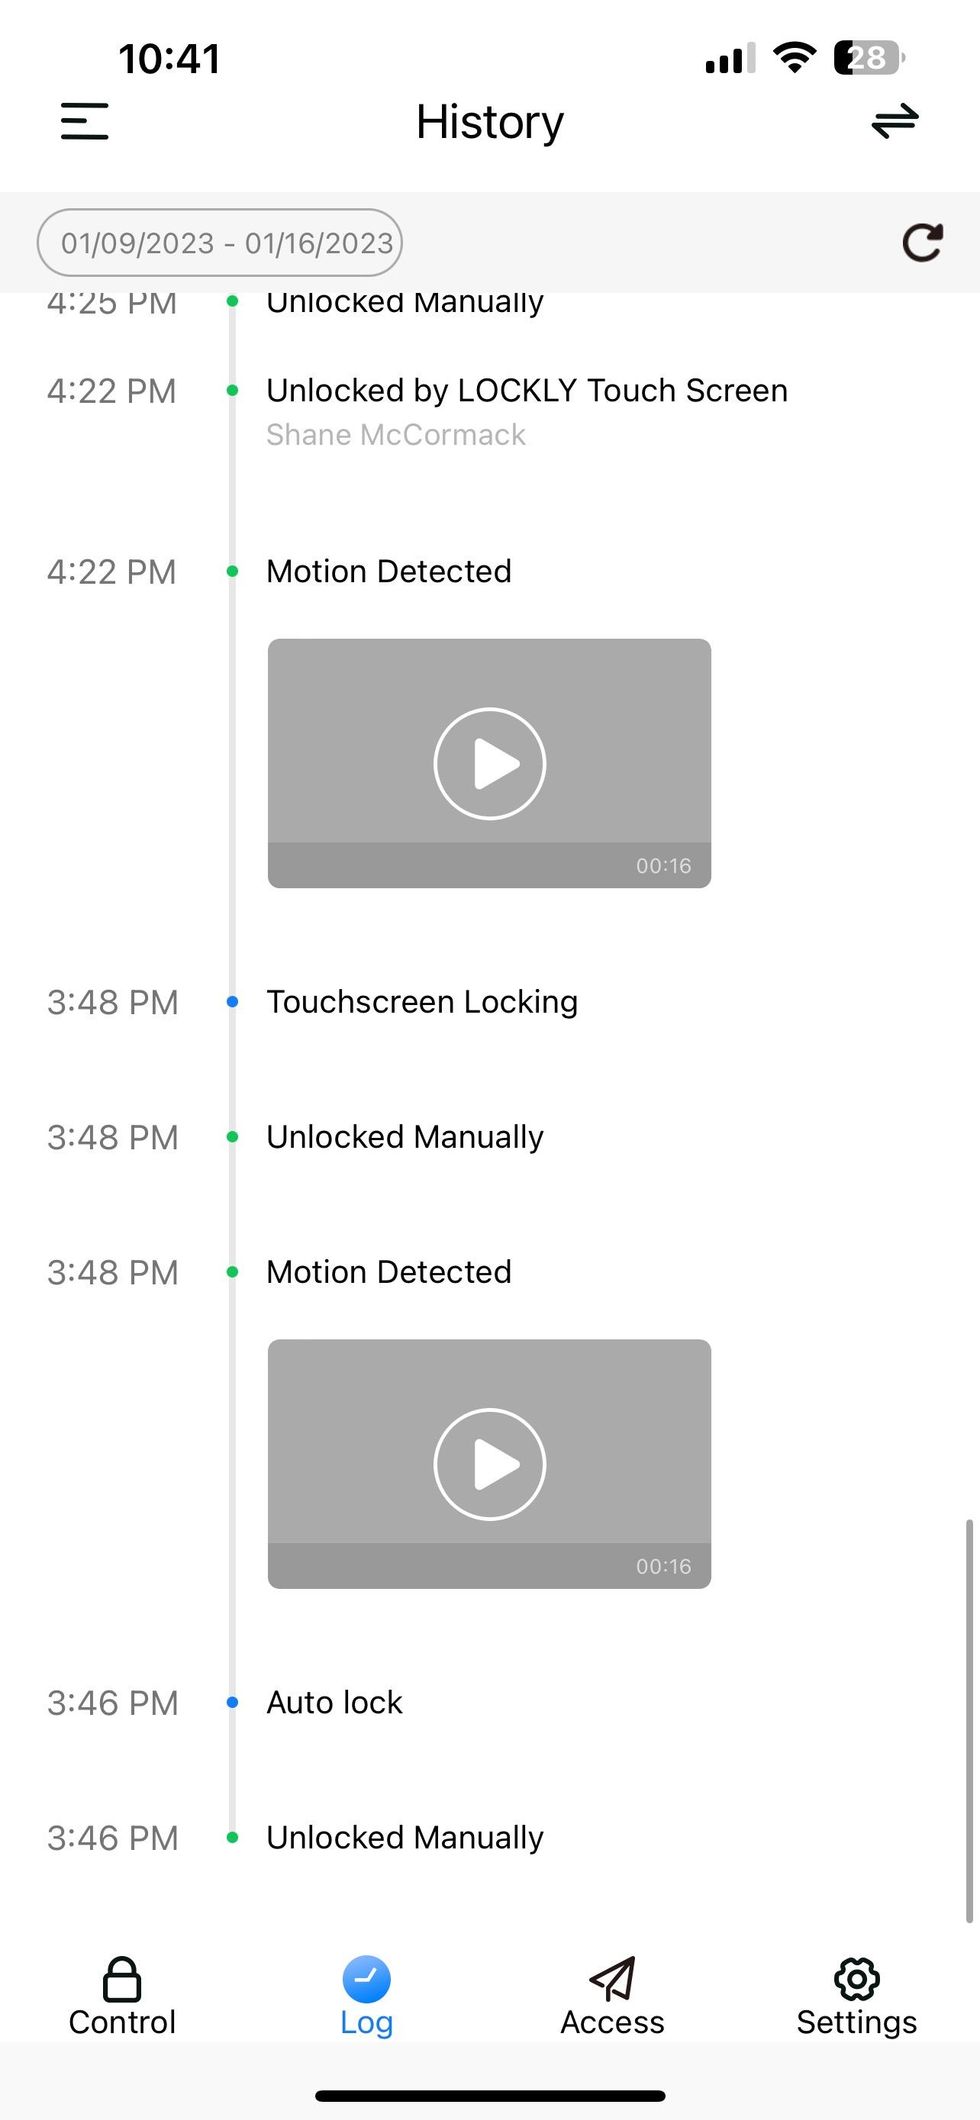 a screenshot of Lockly app showing thge lock's history